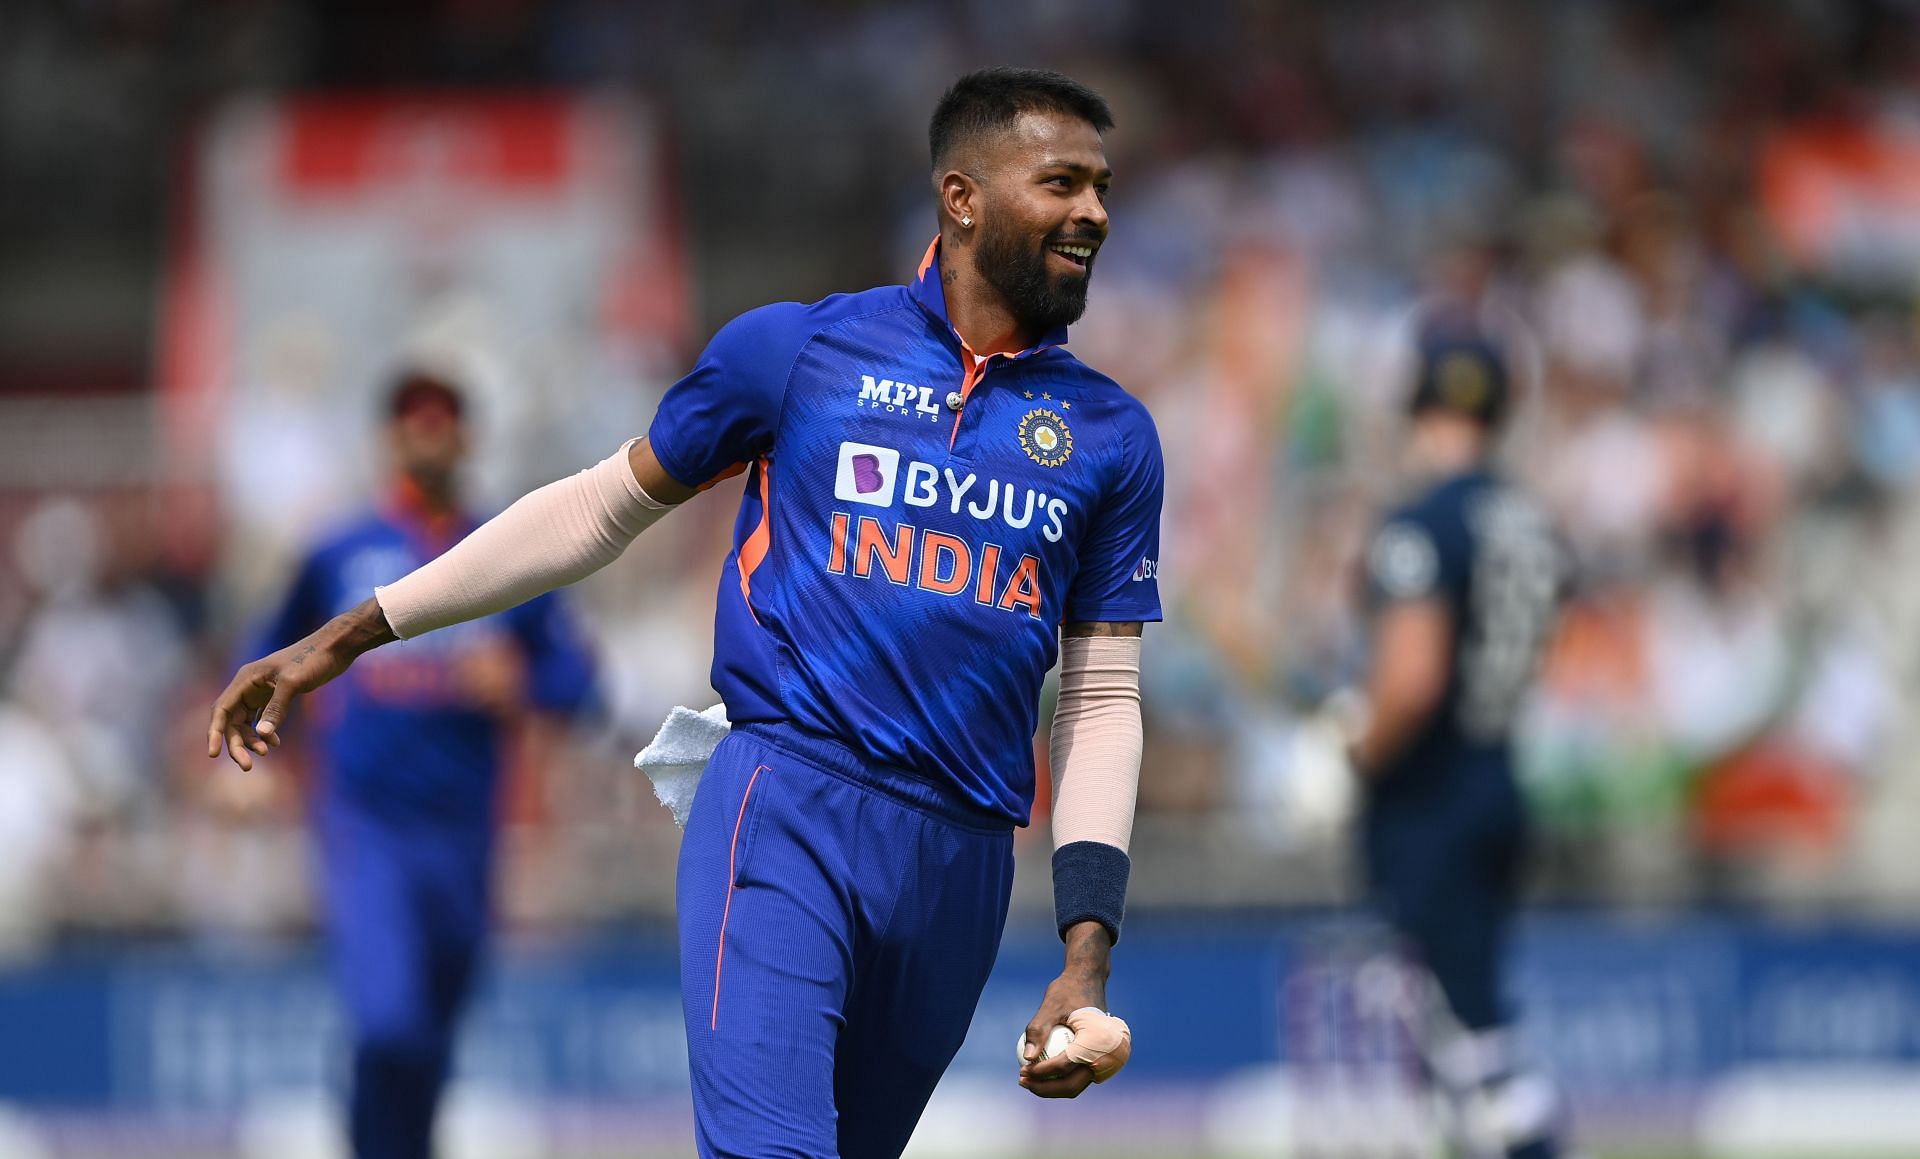 Hardik Pandya was the most successful Indian bowler in the third ODI